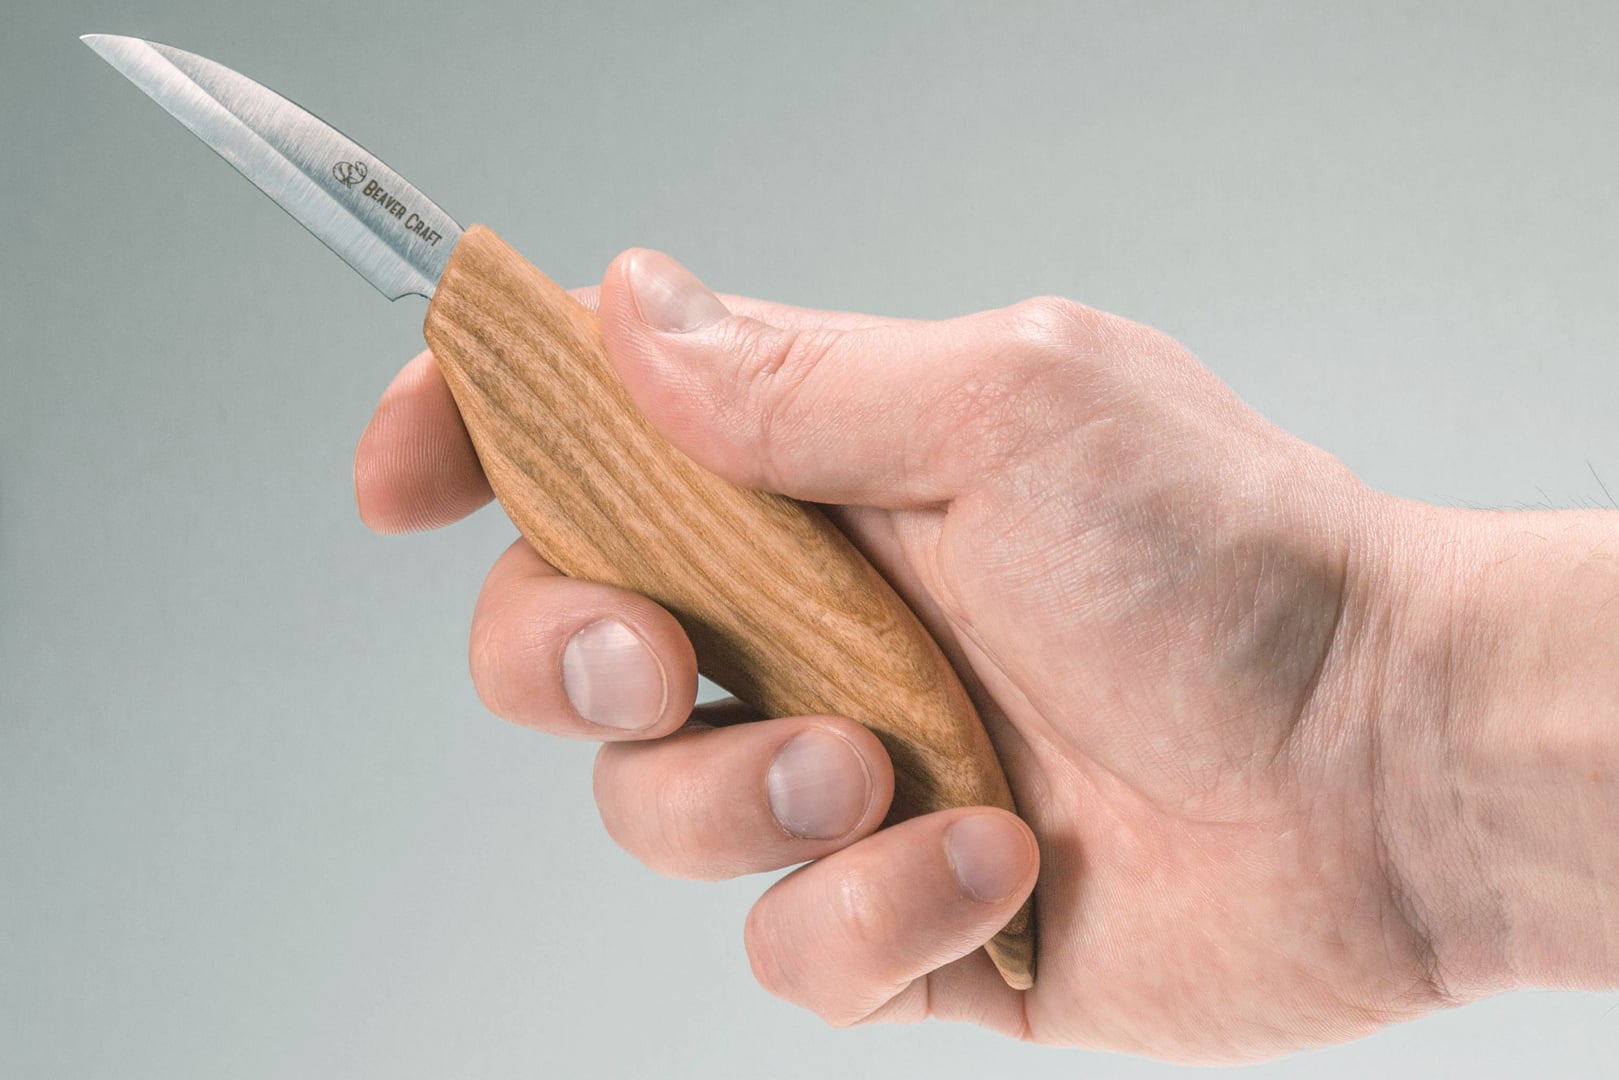 The best Detail wood carving knife C15 - Detail Wood Carving Knife -  BeaverCraft – BeaverCraft Tools